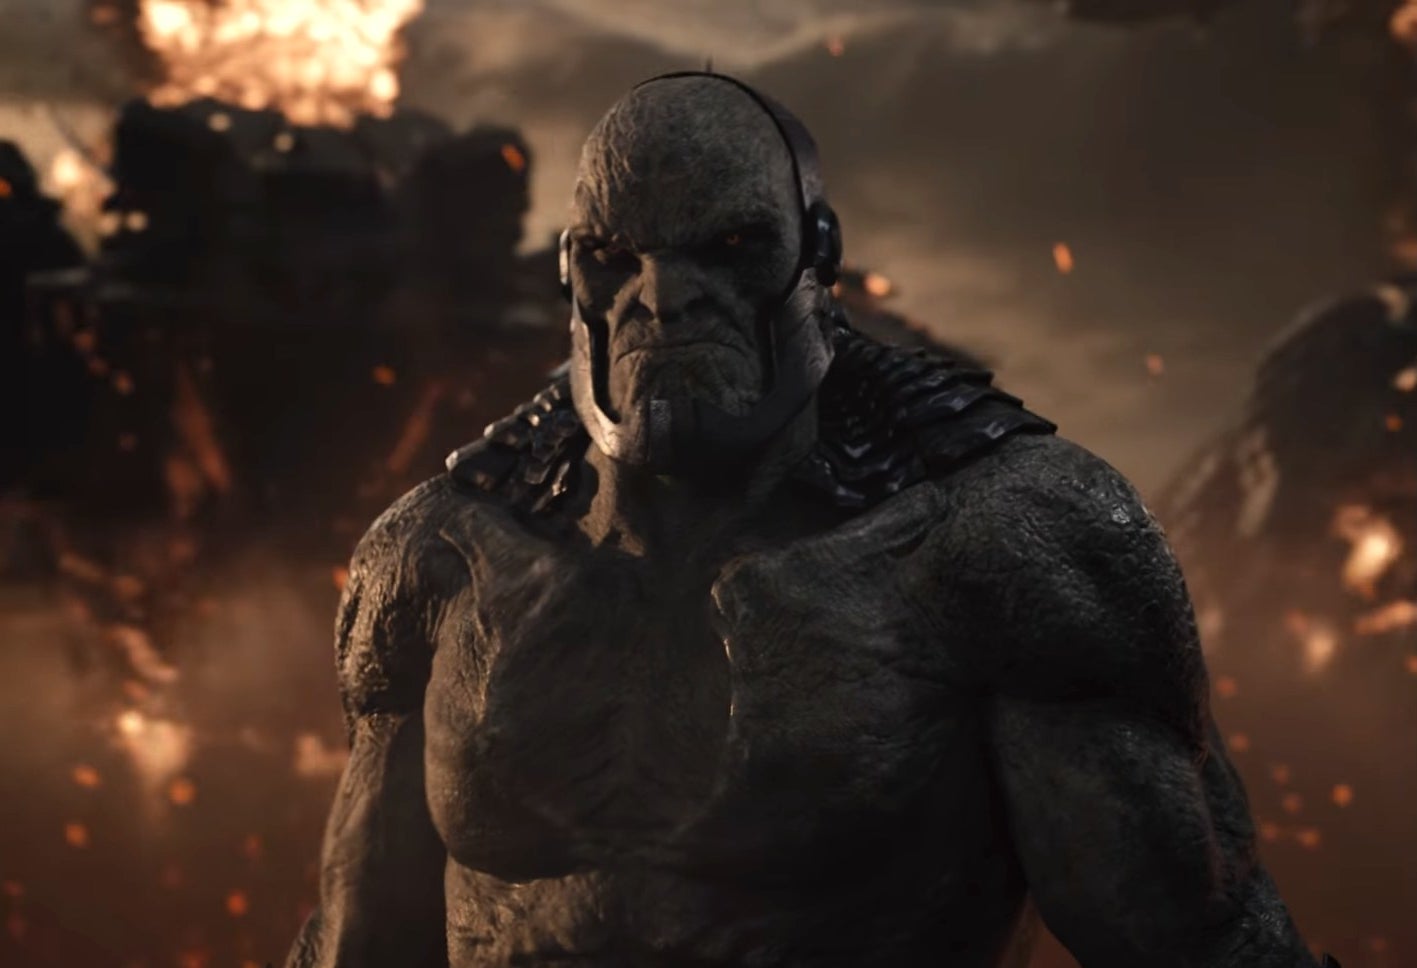 Darkseid standing on Earth in ancient times in &quot;Zack Snyder&#x27;s Justice League&quot;